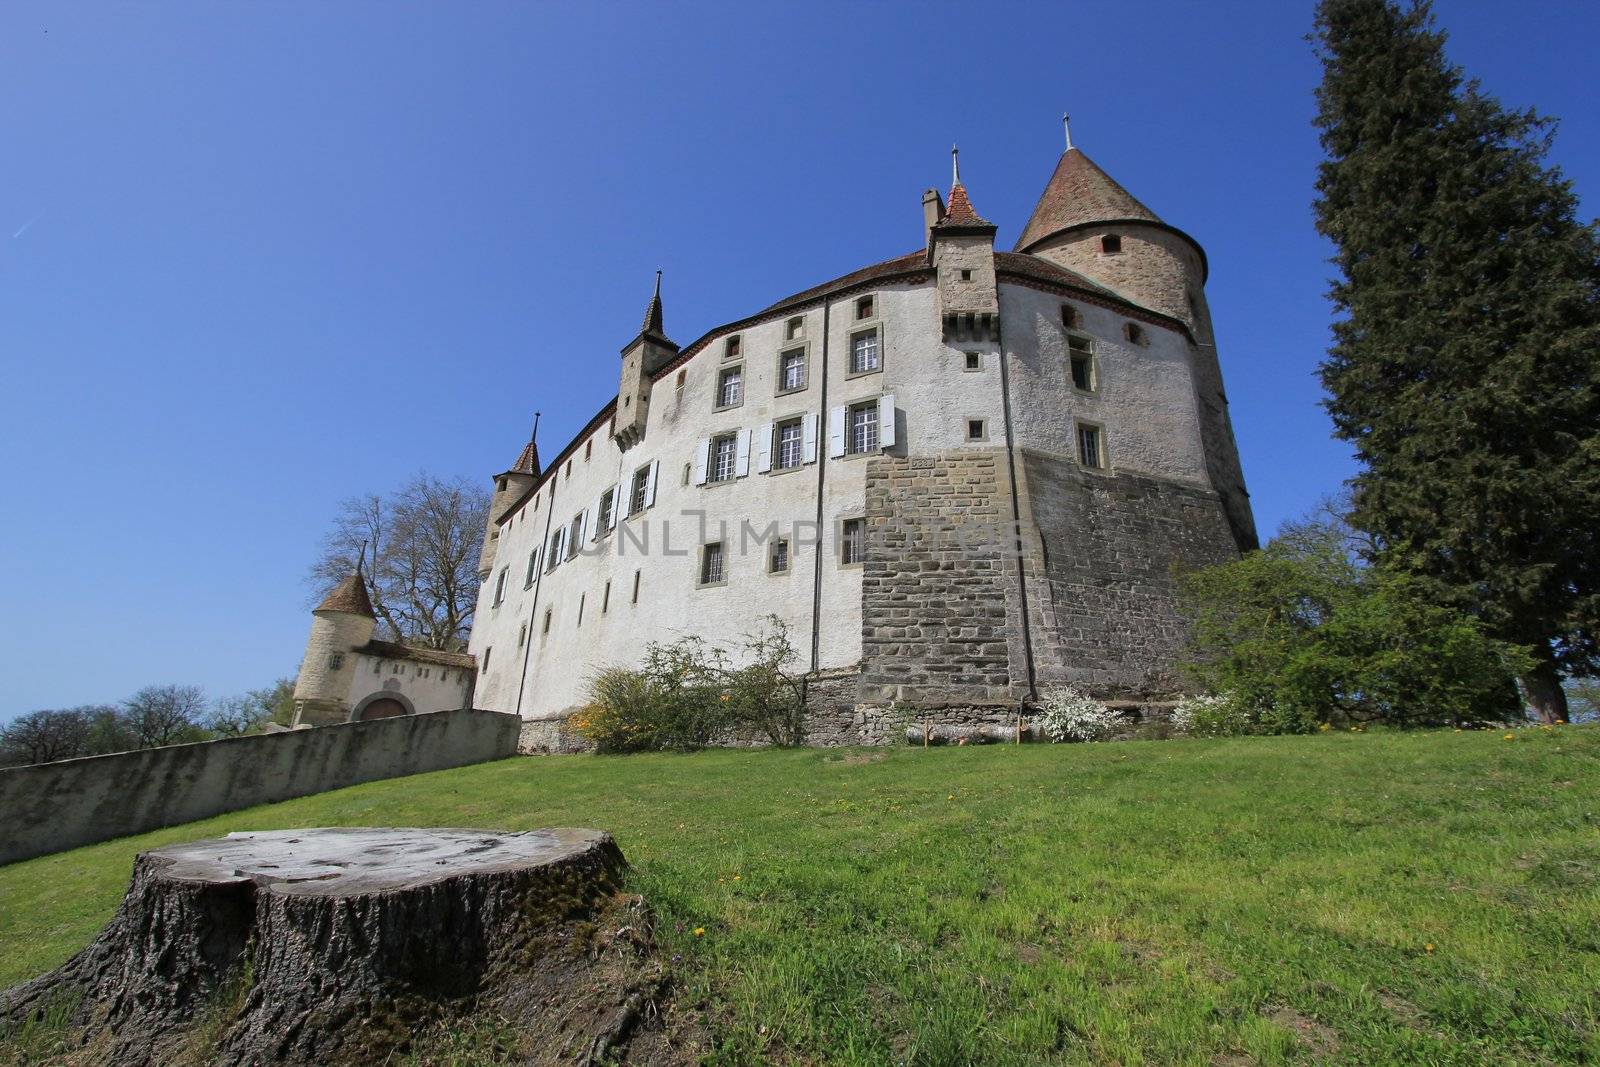 Old castle of Oron by beautiful weather, Vaud canton, Switzerland, next to a cut trunk